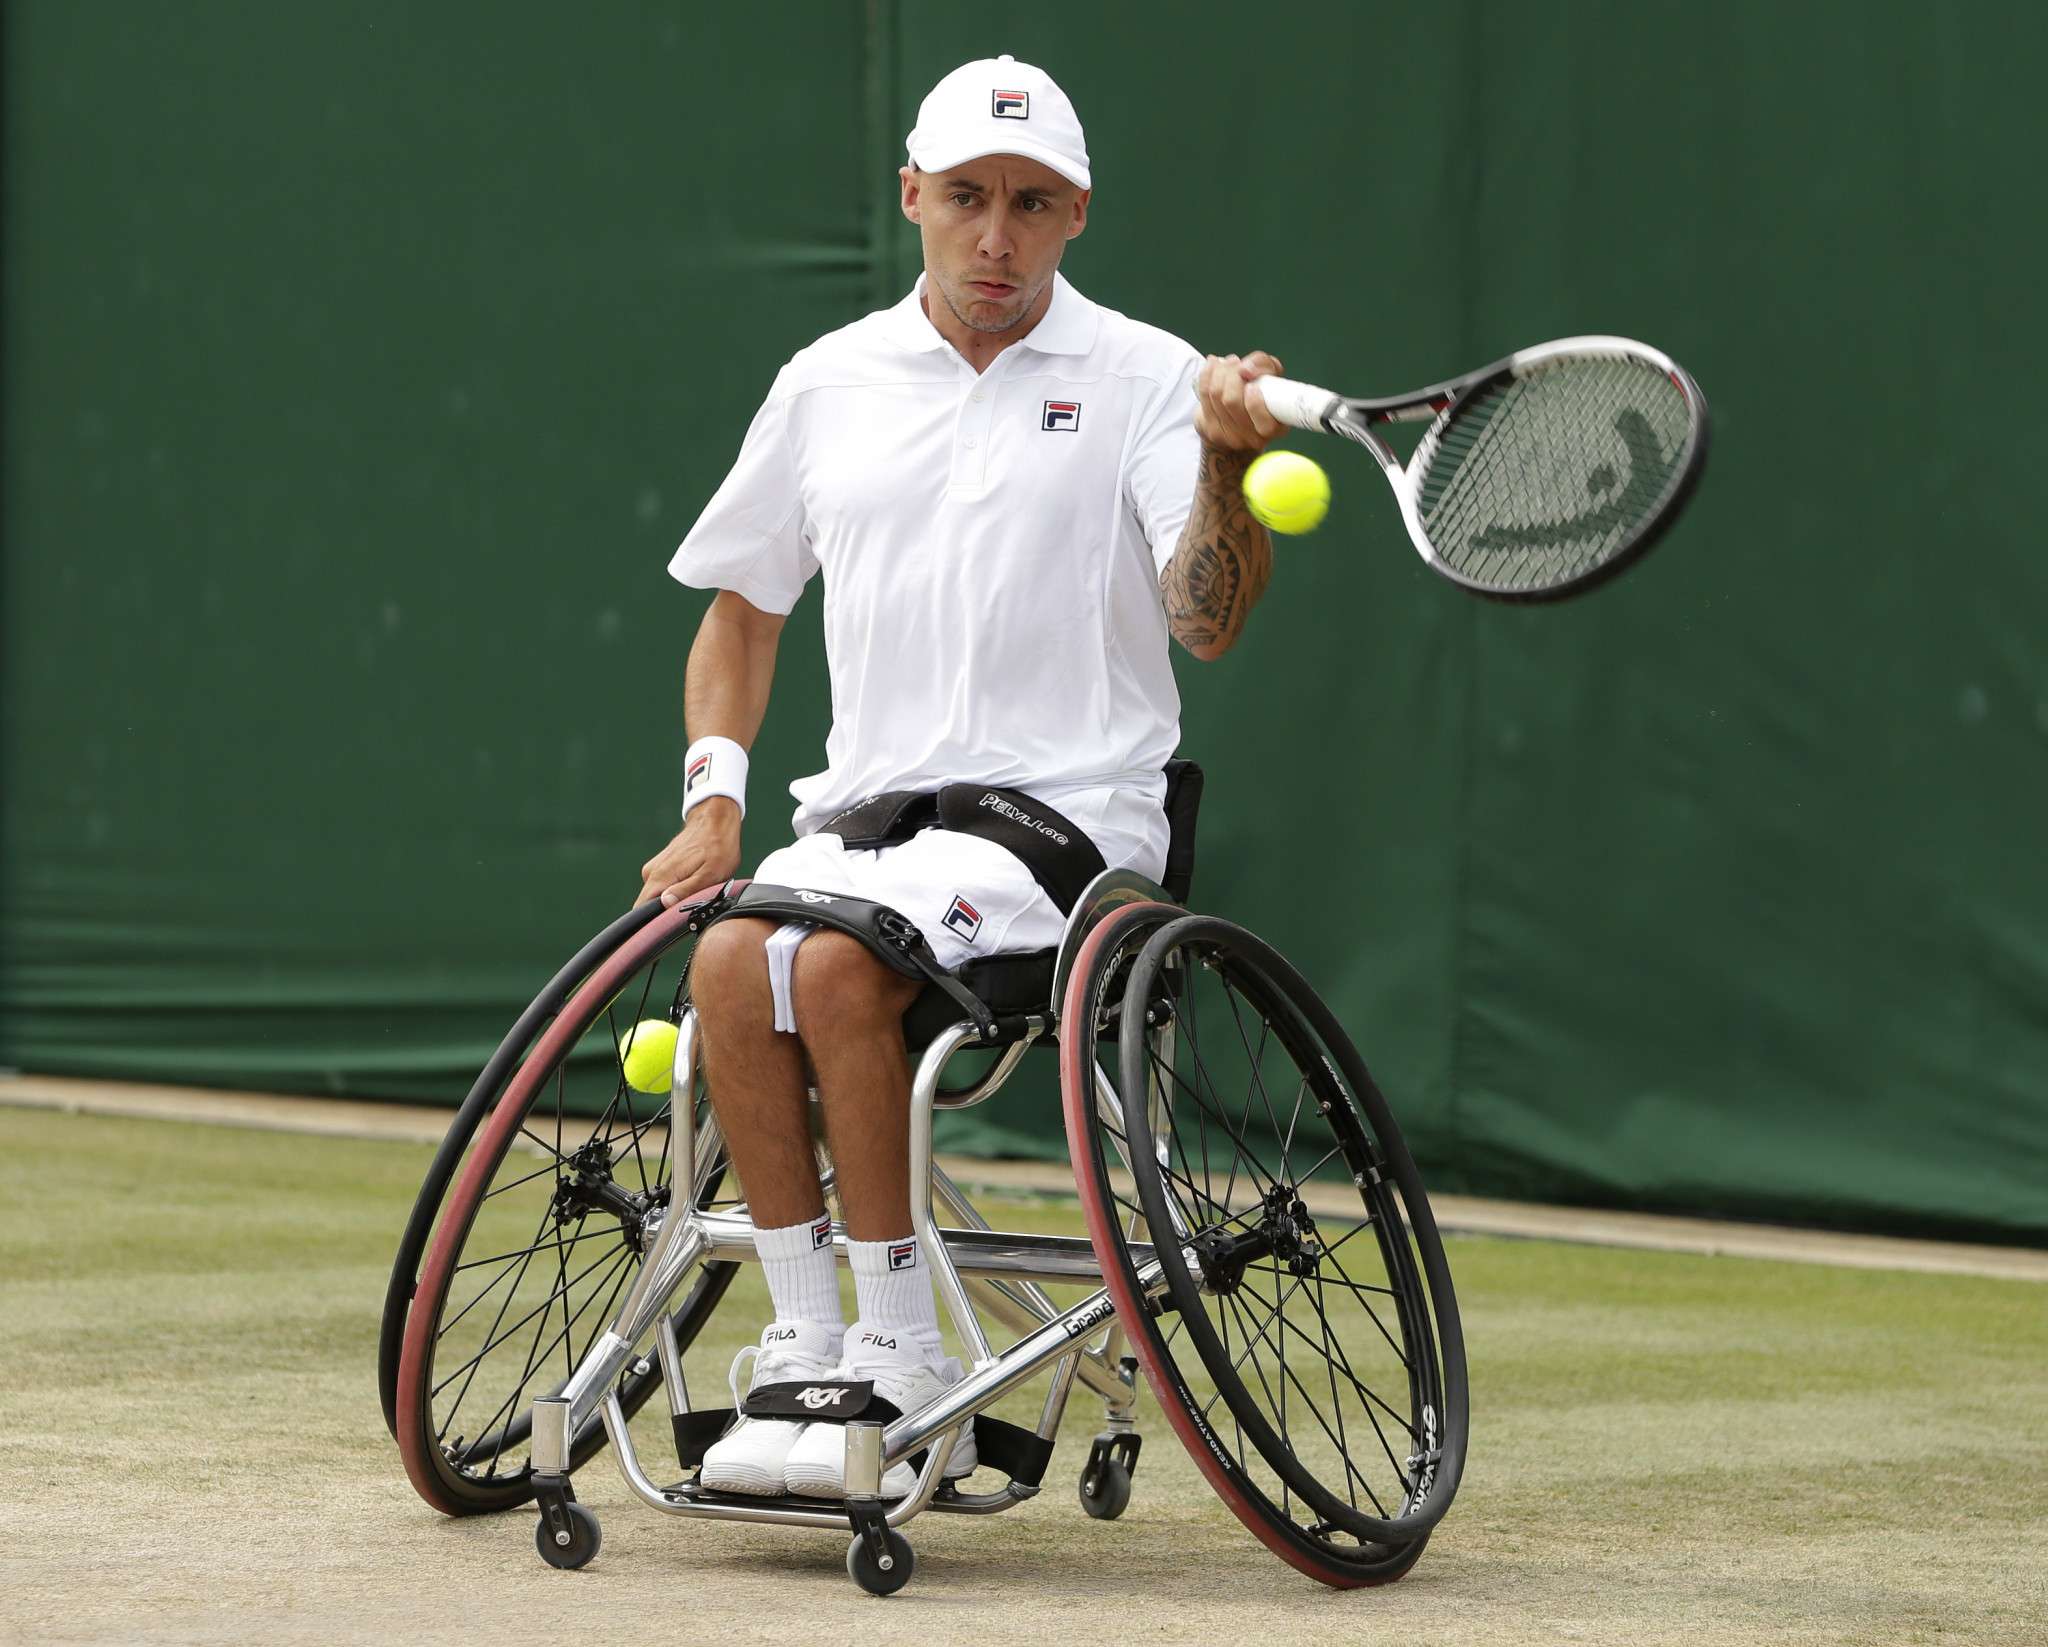 Quad wheelchair tennis to feature at Wimbledon from 2019